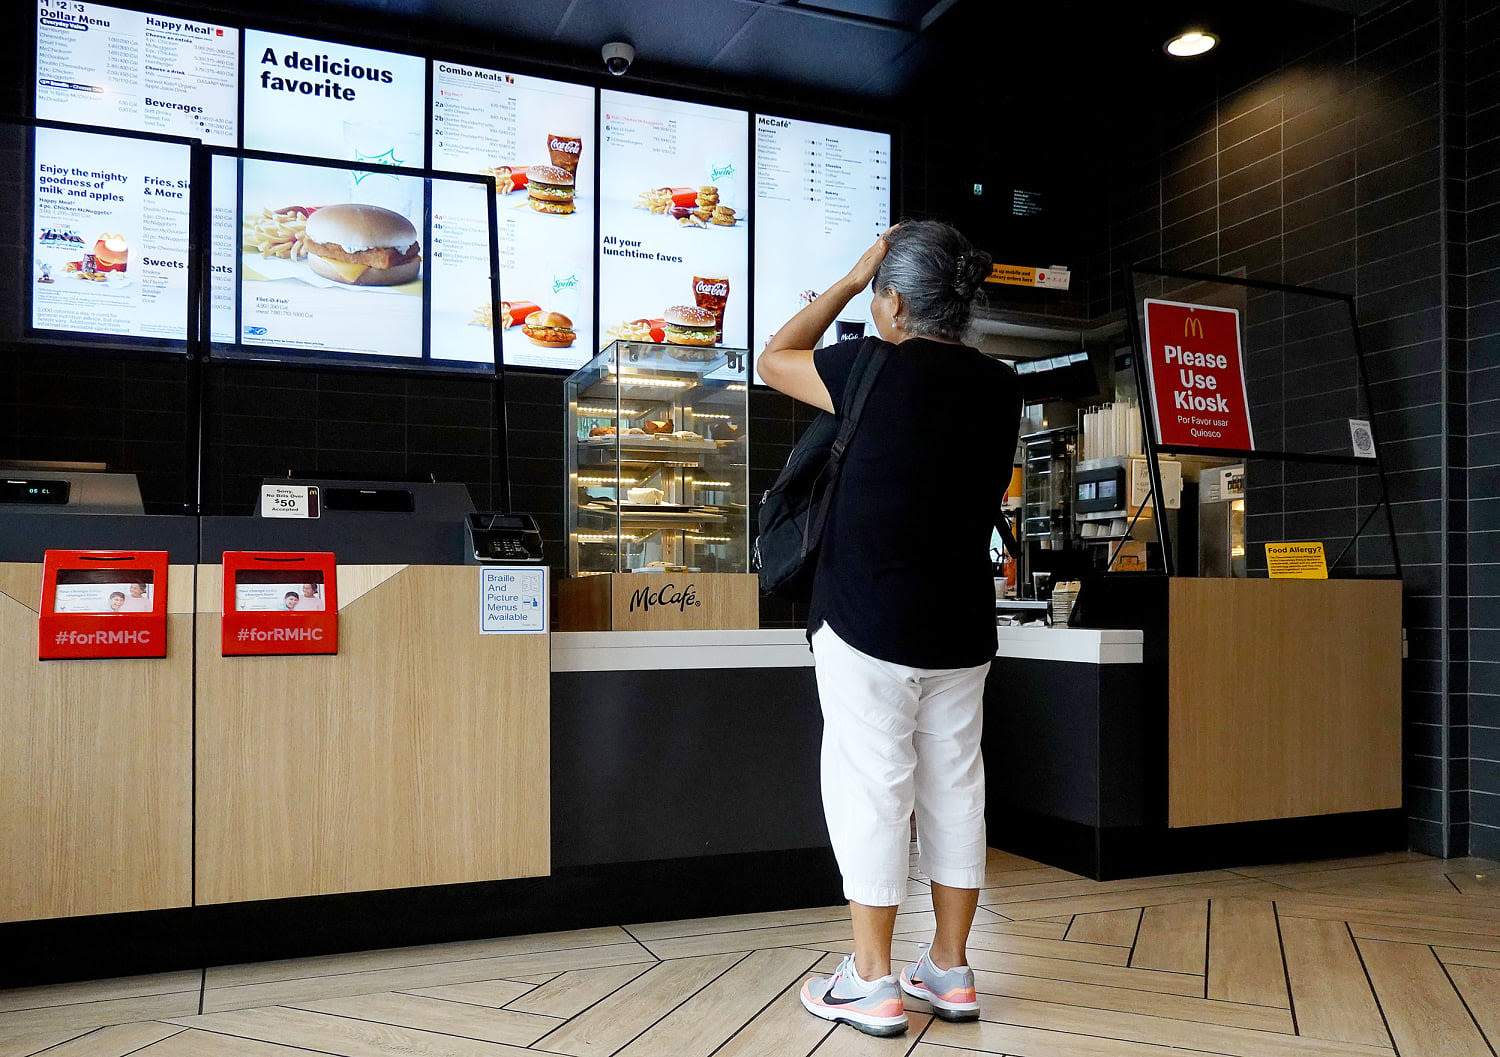 McDonald’s launches a $5 meal as Applebee’s and Chili’s swoop in on fast-food customers